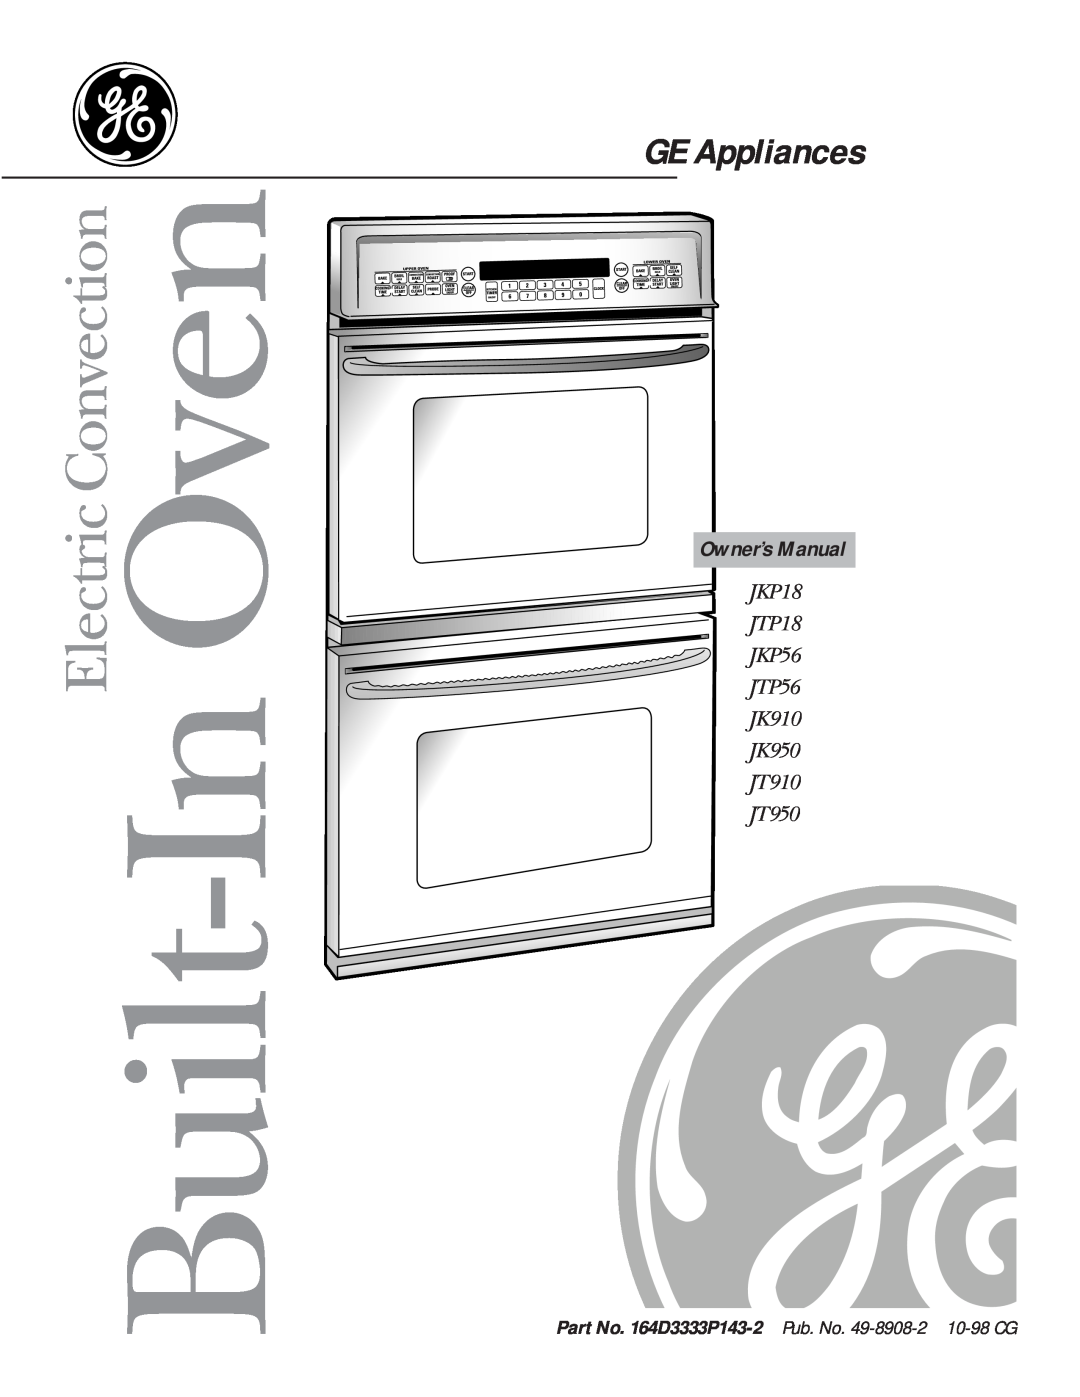 GE JKP17 warranty GE Appliances, Built-in Oven, 164D2966P124, Safety instructions, Operating Instructions, Tips, 33-36 